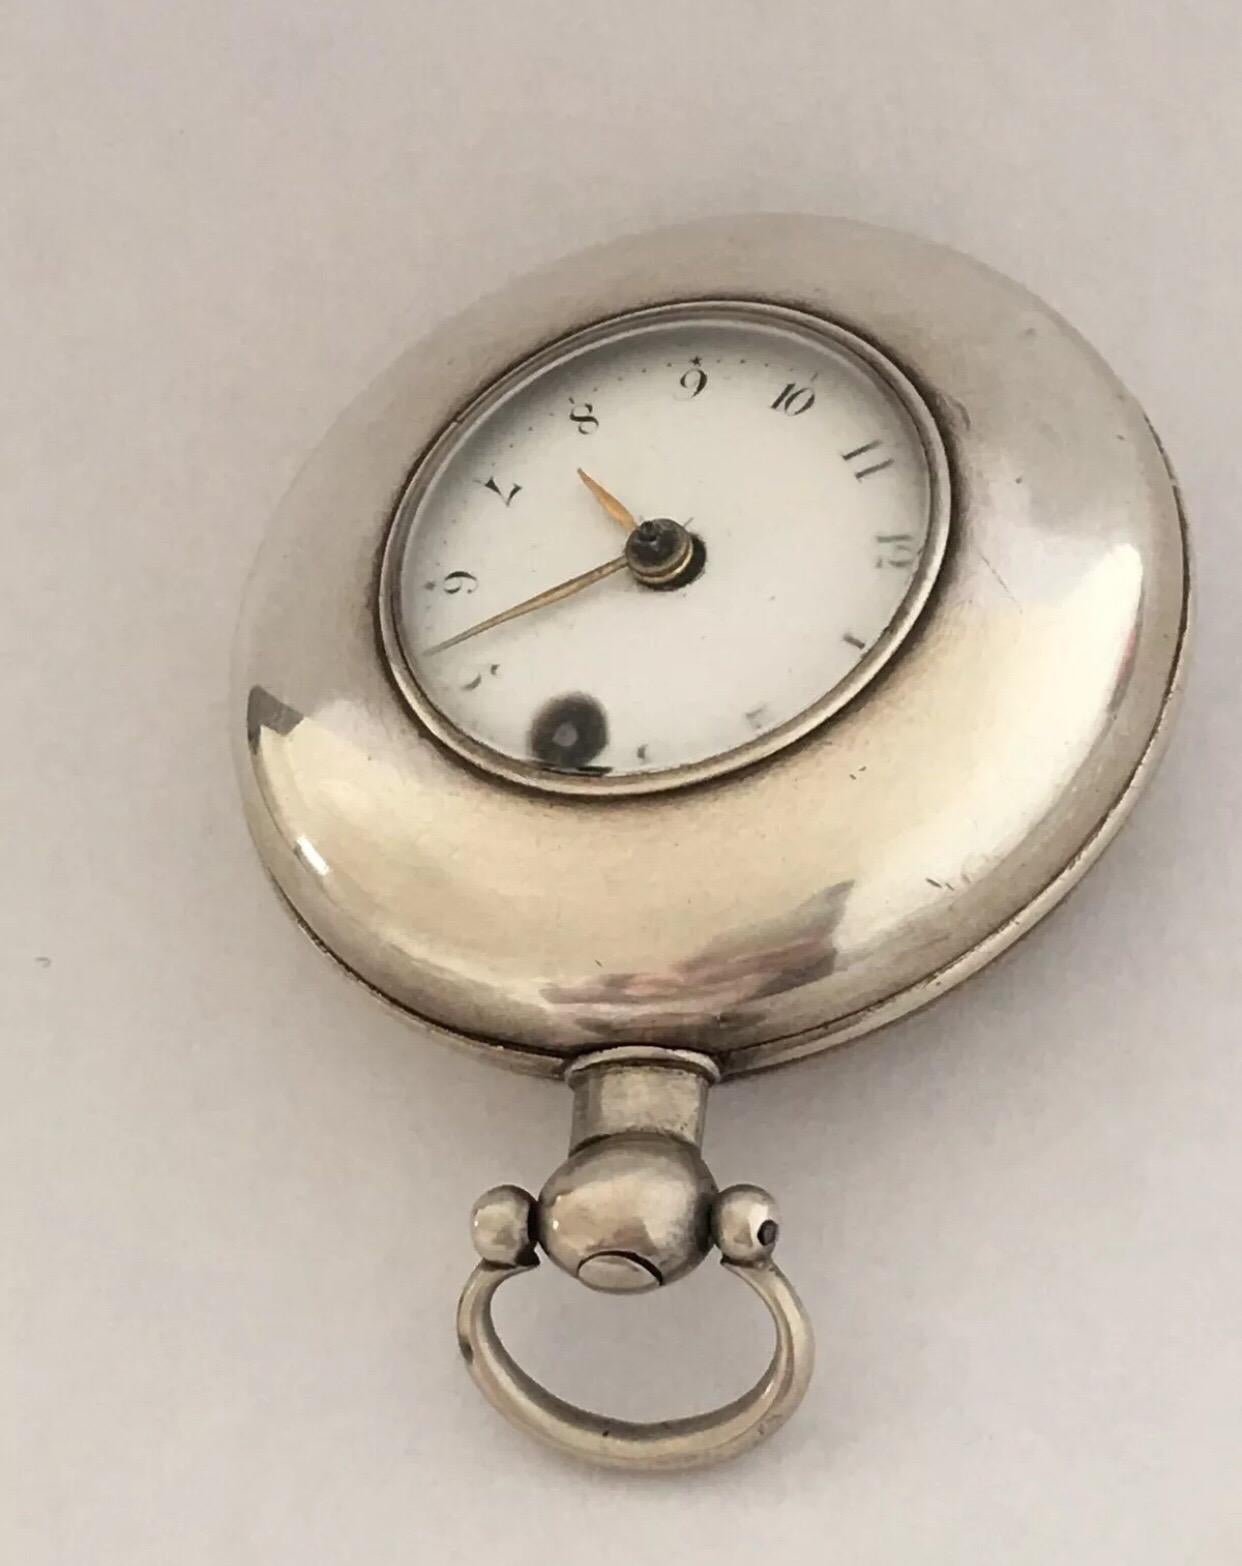 Rare Early Verge Fusee London Maker Half Hunter Silver Pocket Watch For Sale 2